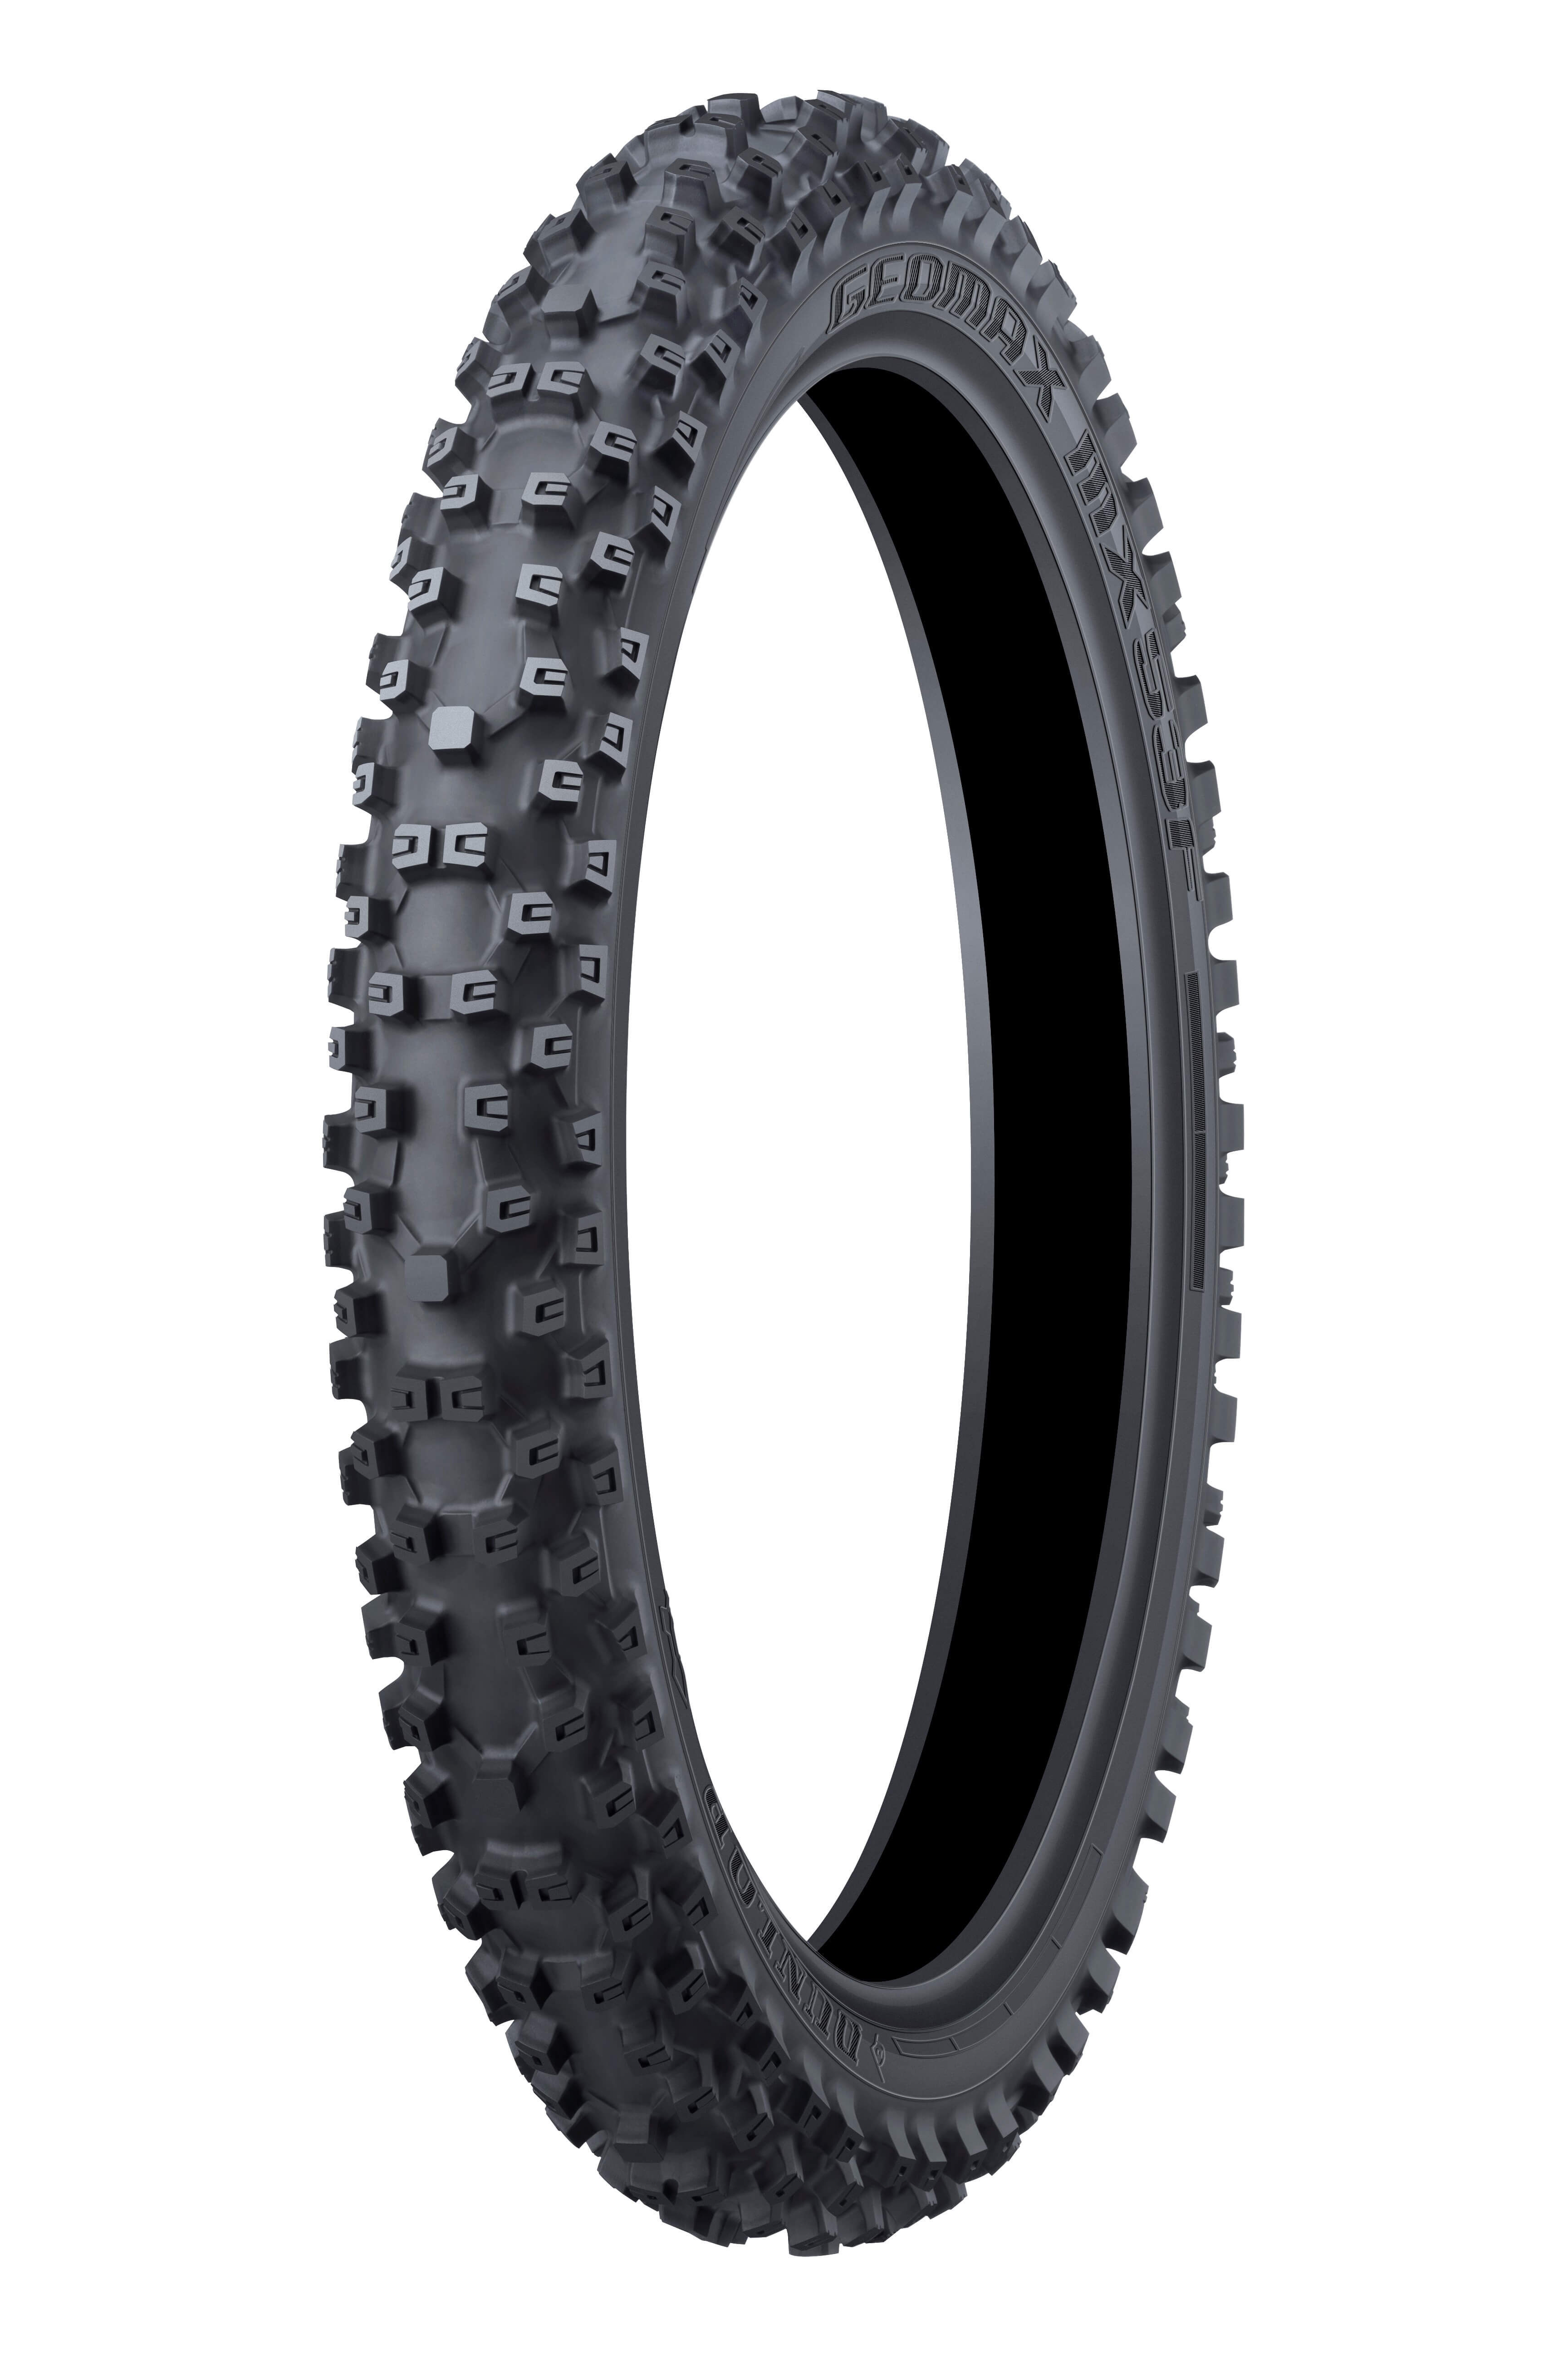 80/100-21 Dunlop Geomax MX53 Front Tire